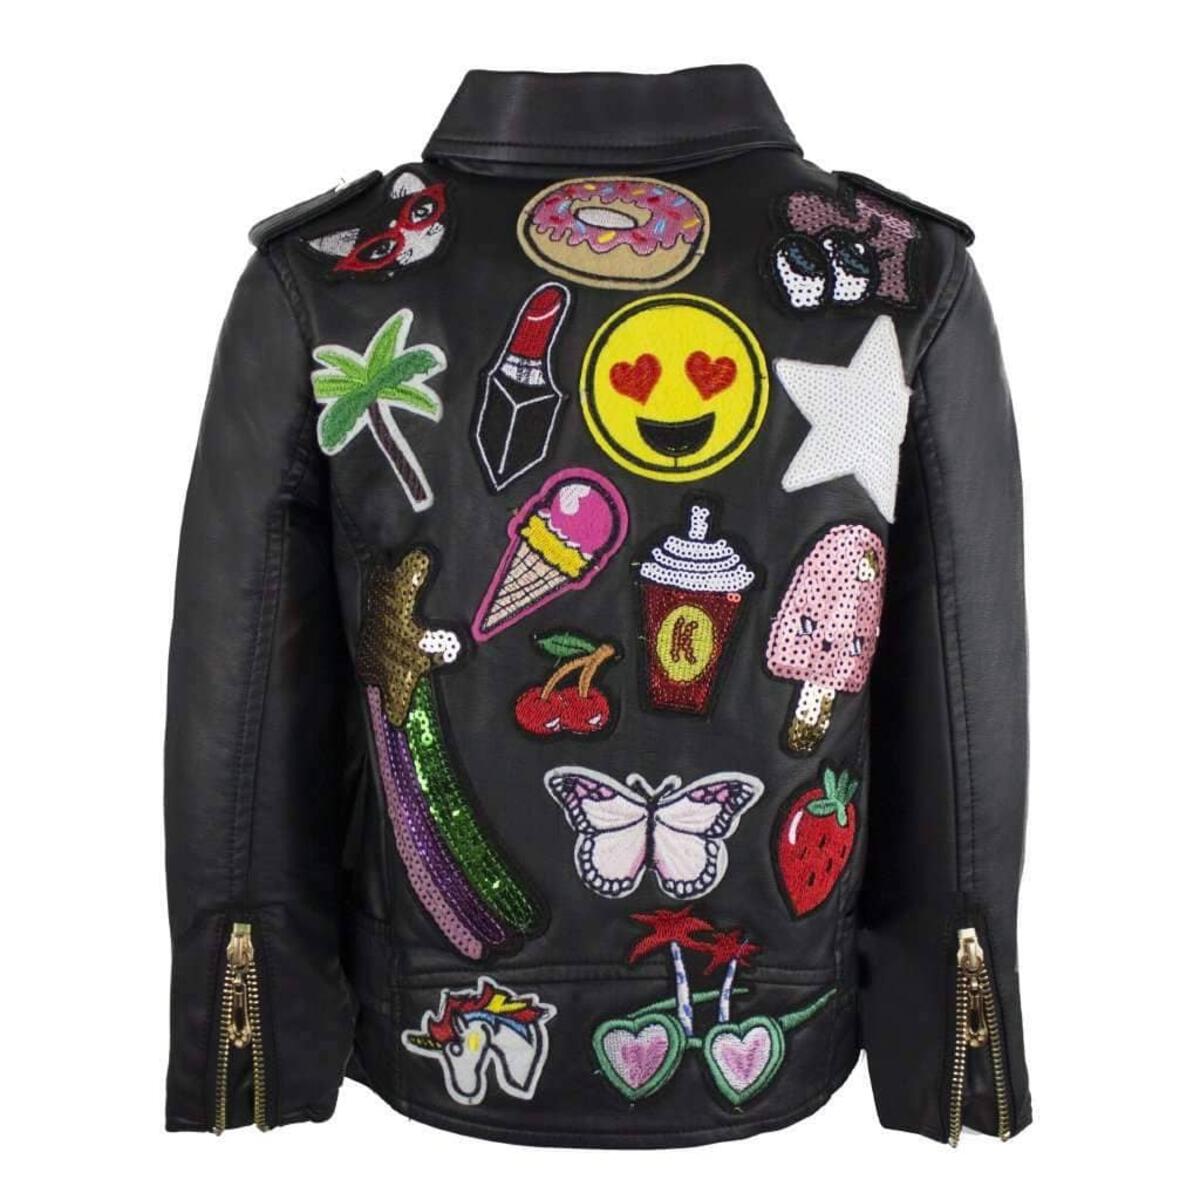 Girls All about The Patch Vegan Leather Jacket